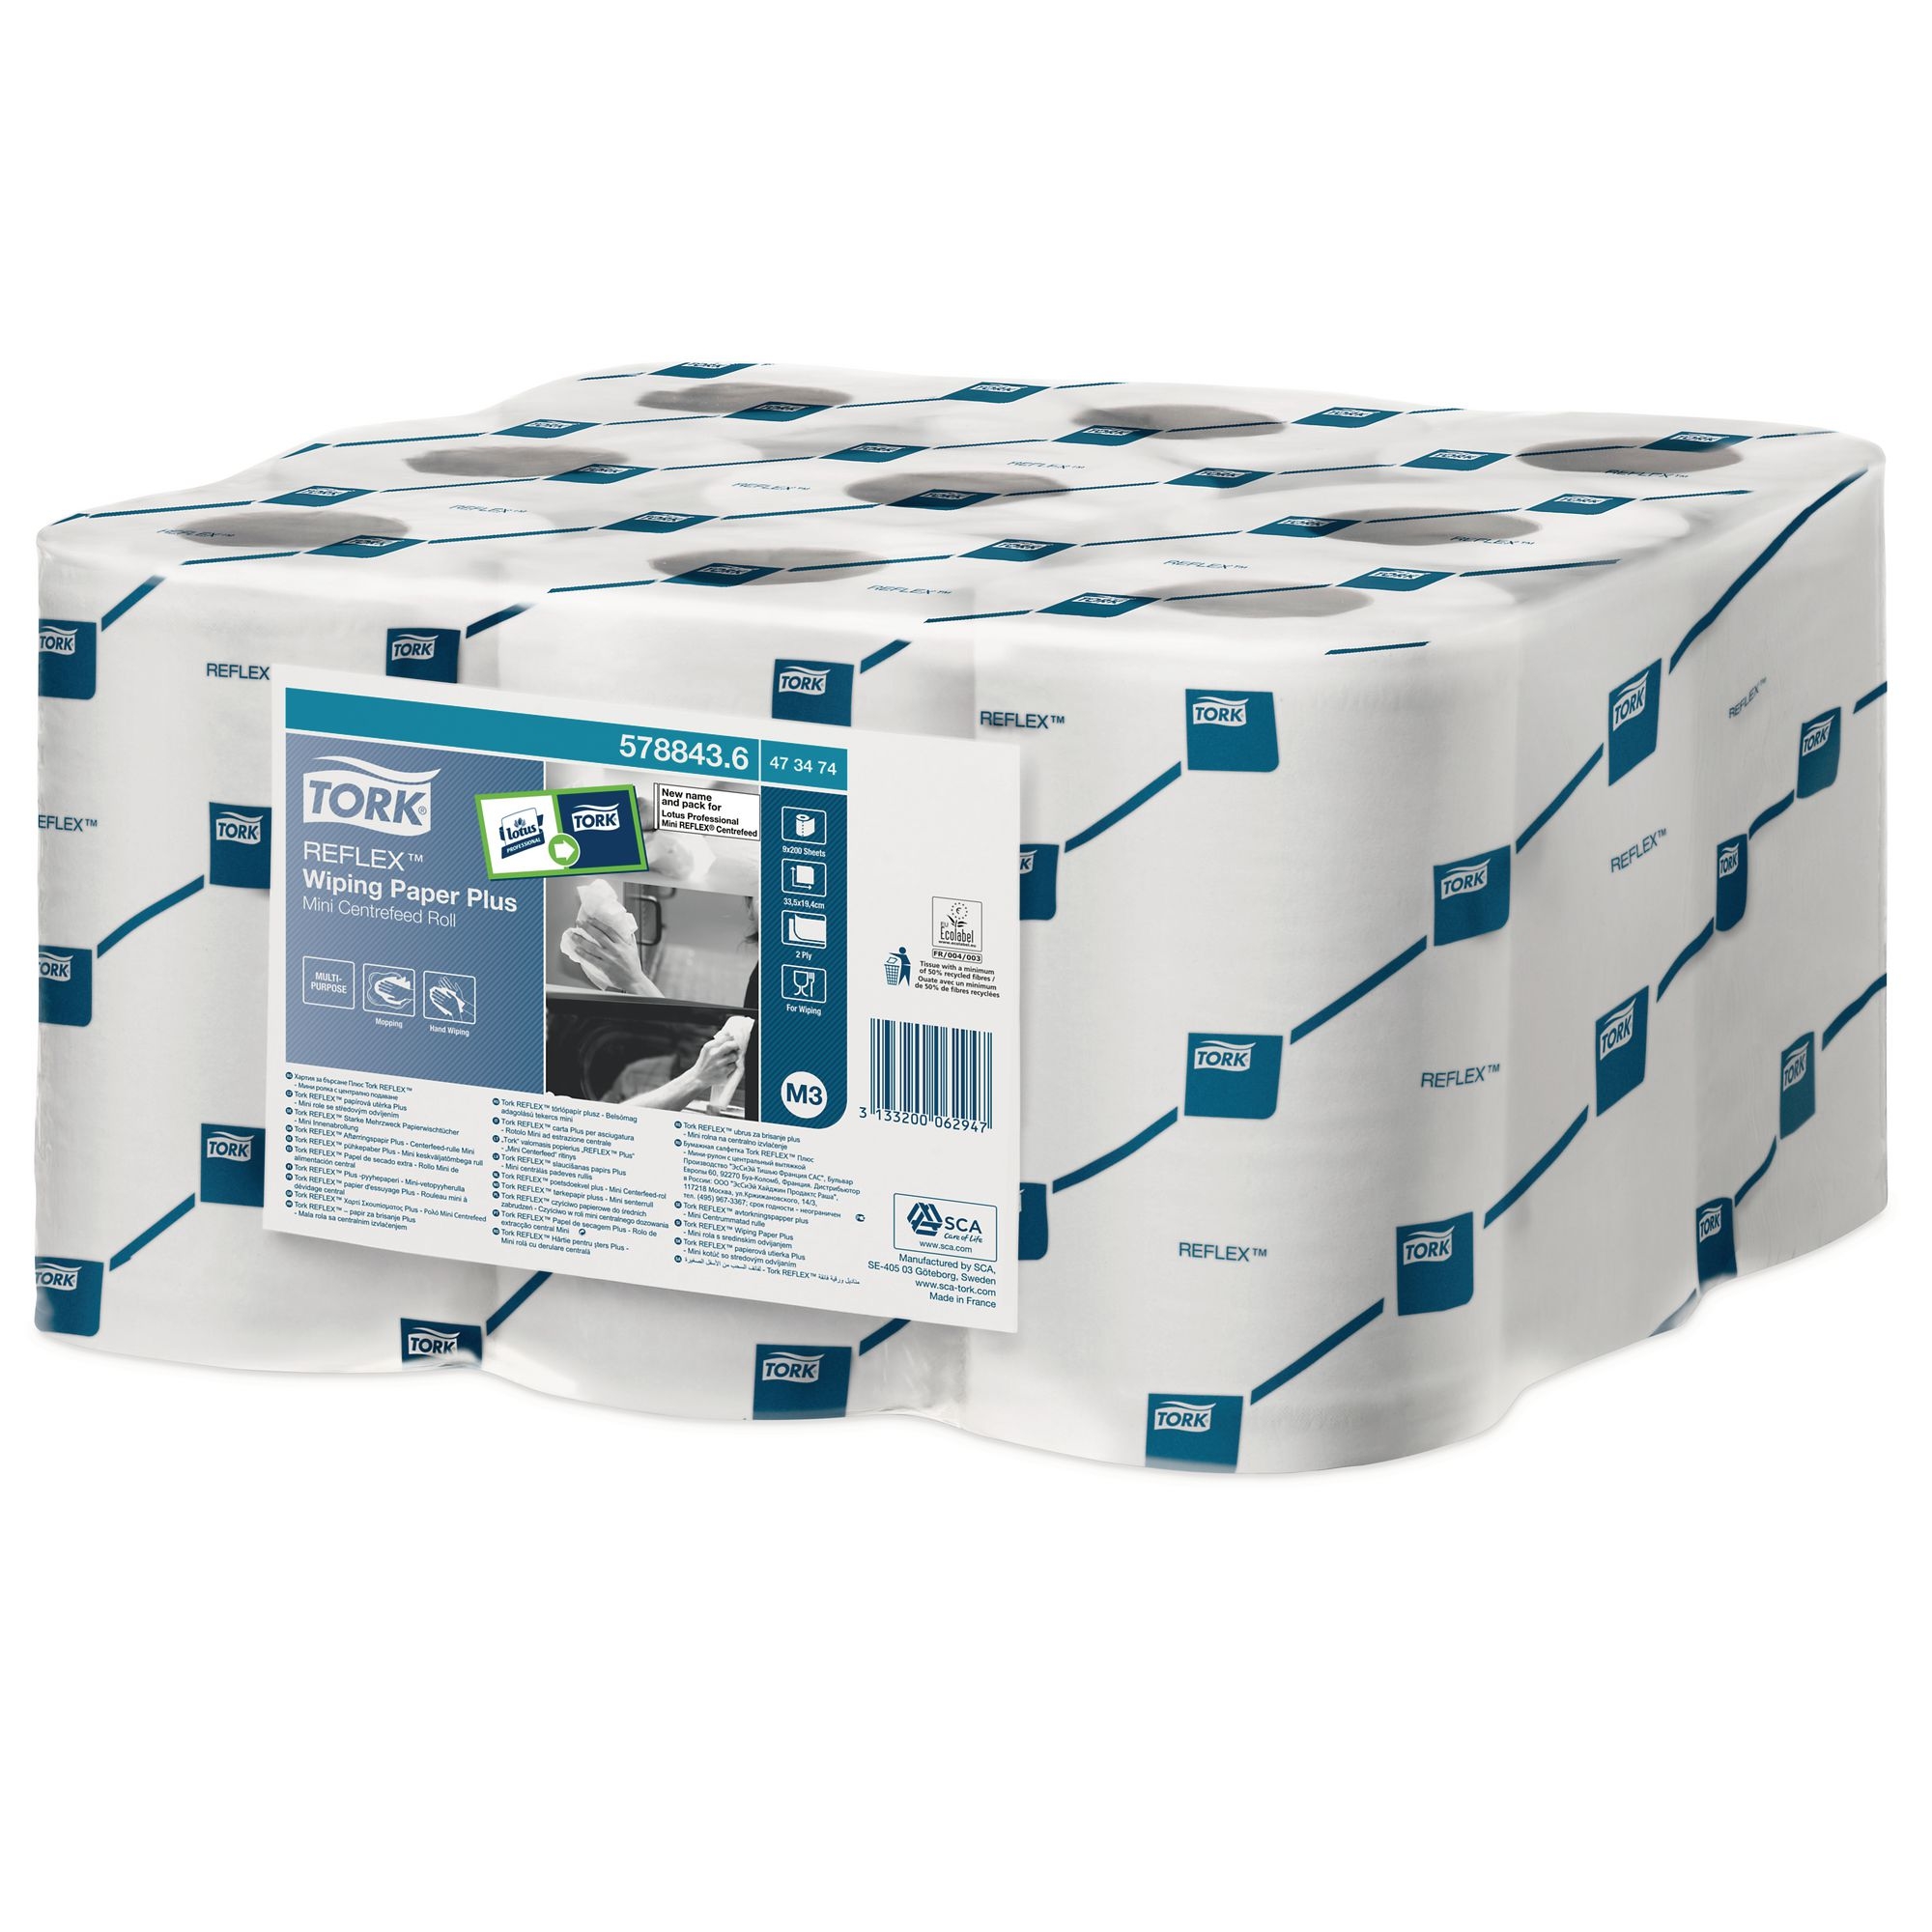 Tork® Reflex™ Single Sheet Centrefeed Wiping Paper Plus White (Case of 9)